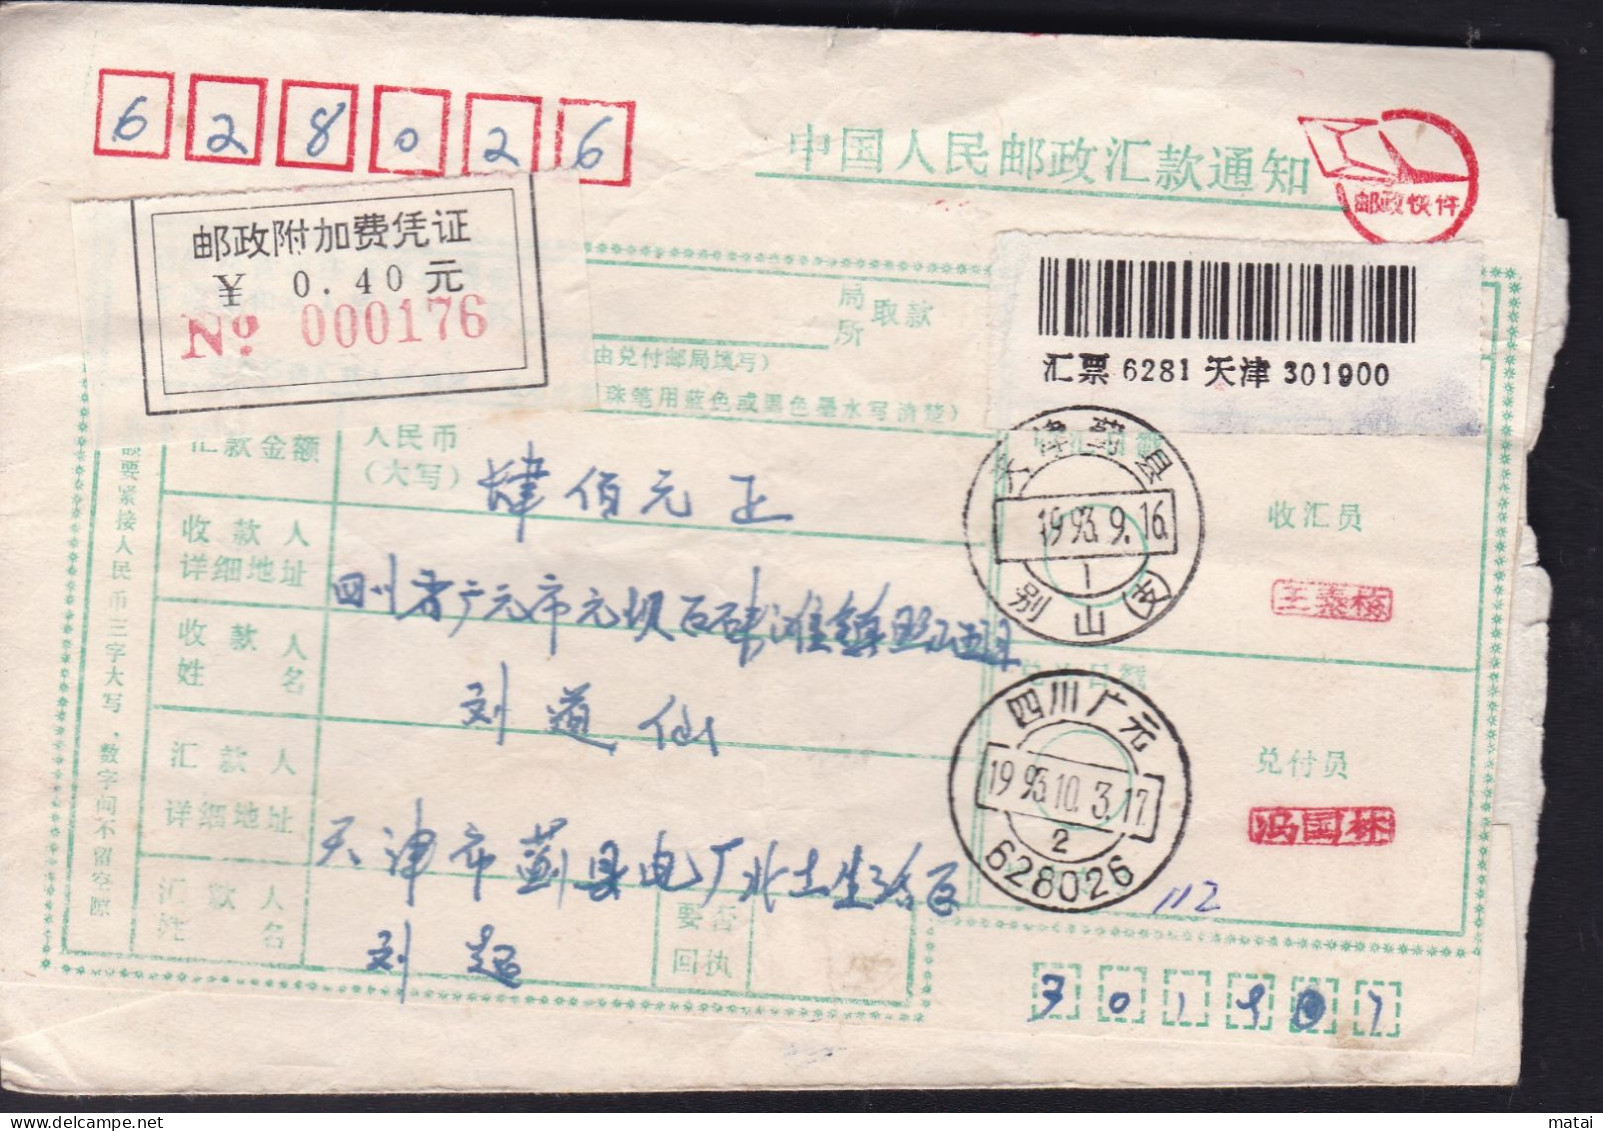 CHINA  CHINE  Remittance Note WITH TIANJIN 300000   ADDED CHARGE LABEL (ACL) 0.40 YUAN - Briefe U. Dokumente